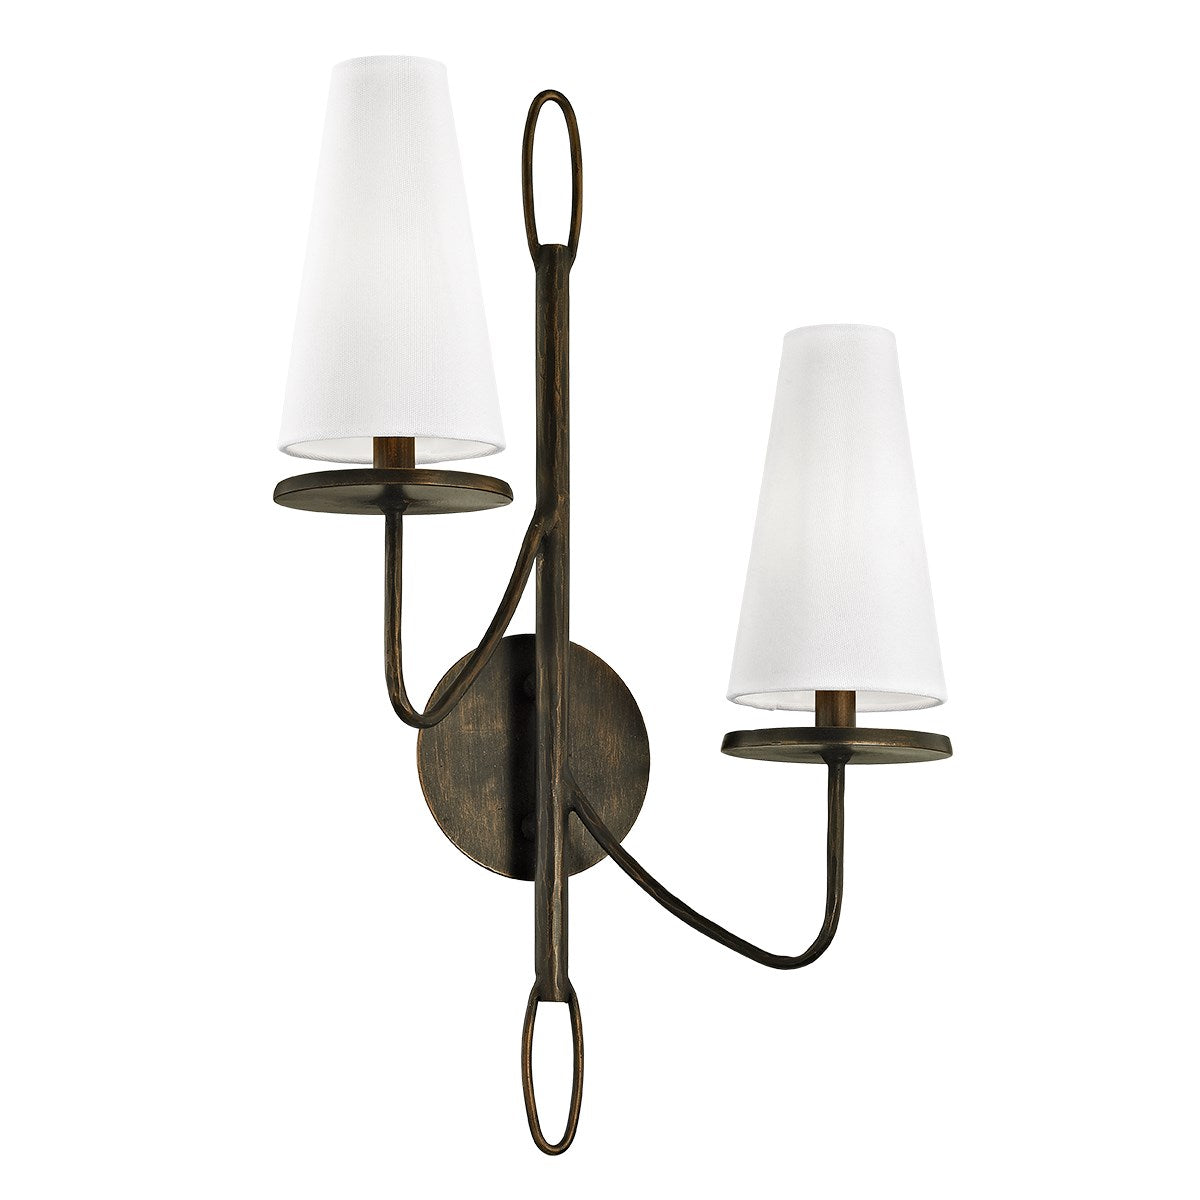 Marcel Wall Sconce